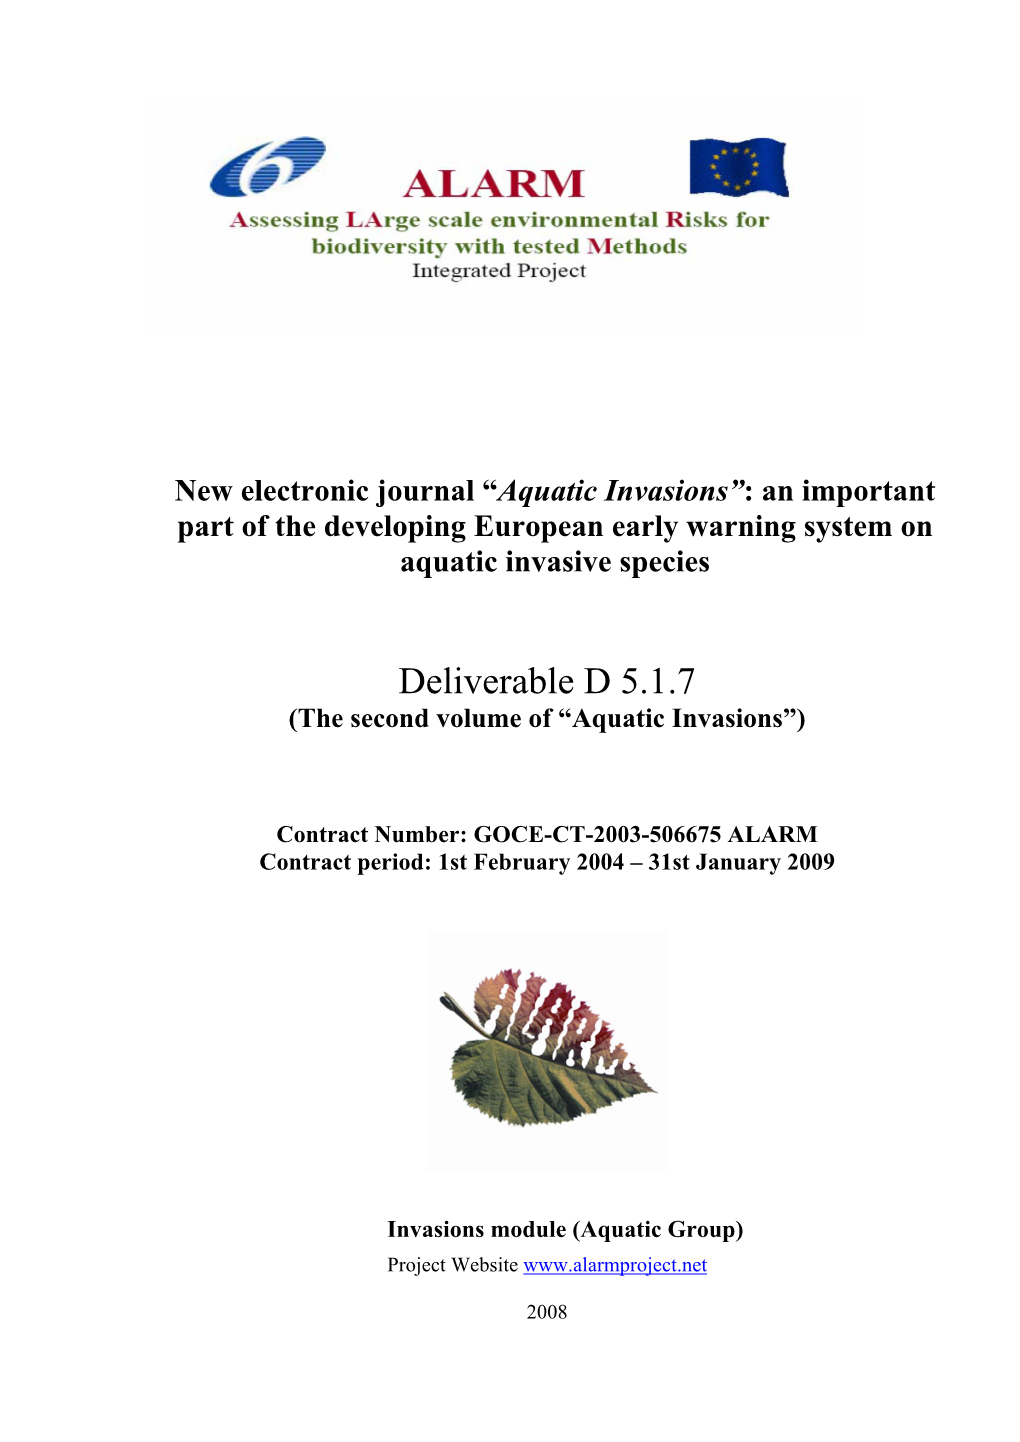 Aquatic Invasions”: an Important Part of the Developing European Early Warning System on Aquatic Invasive Species